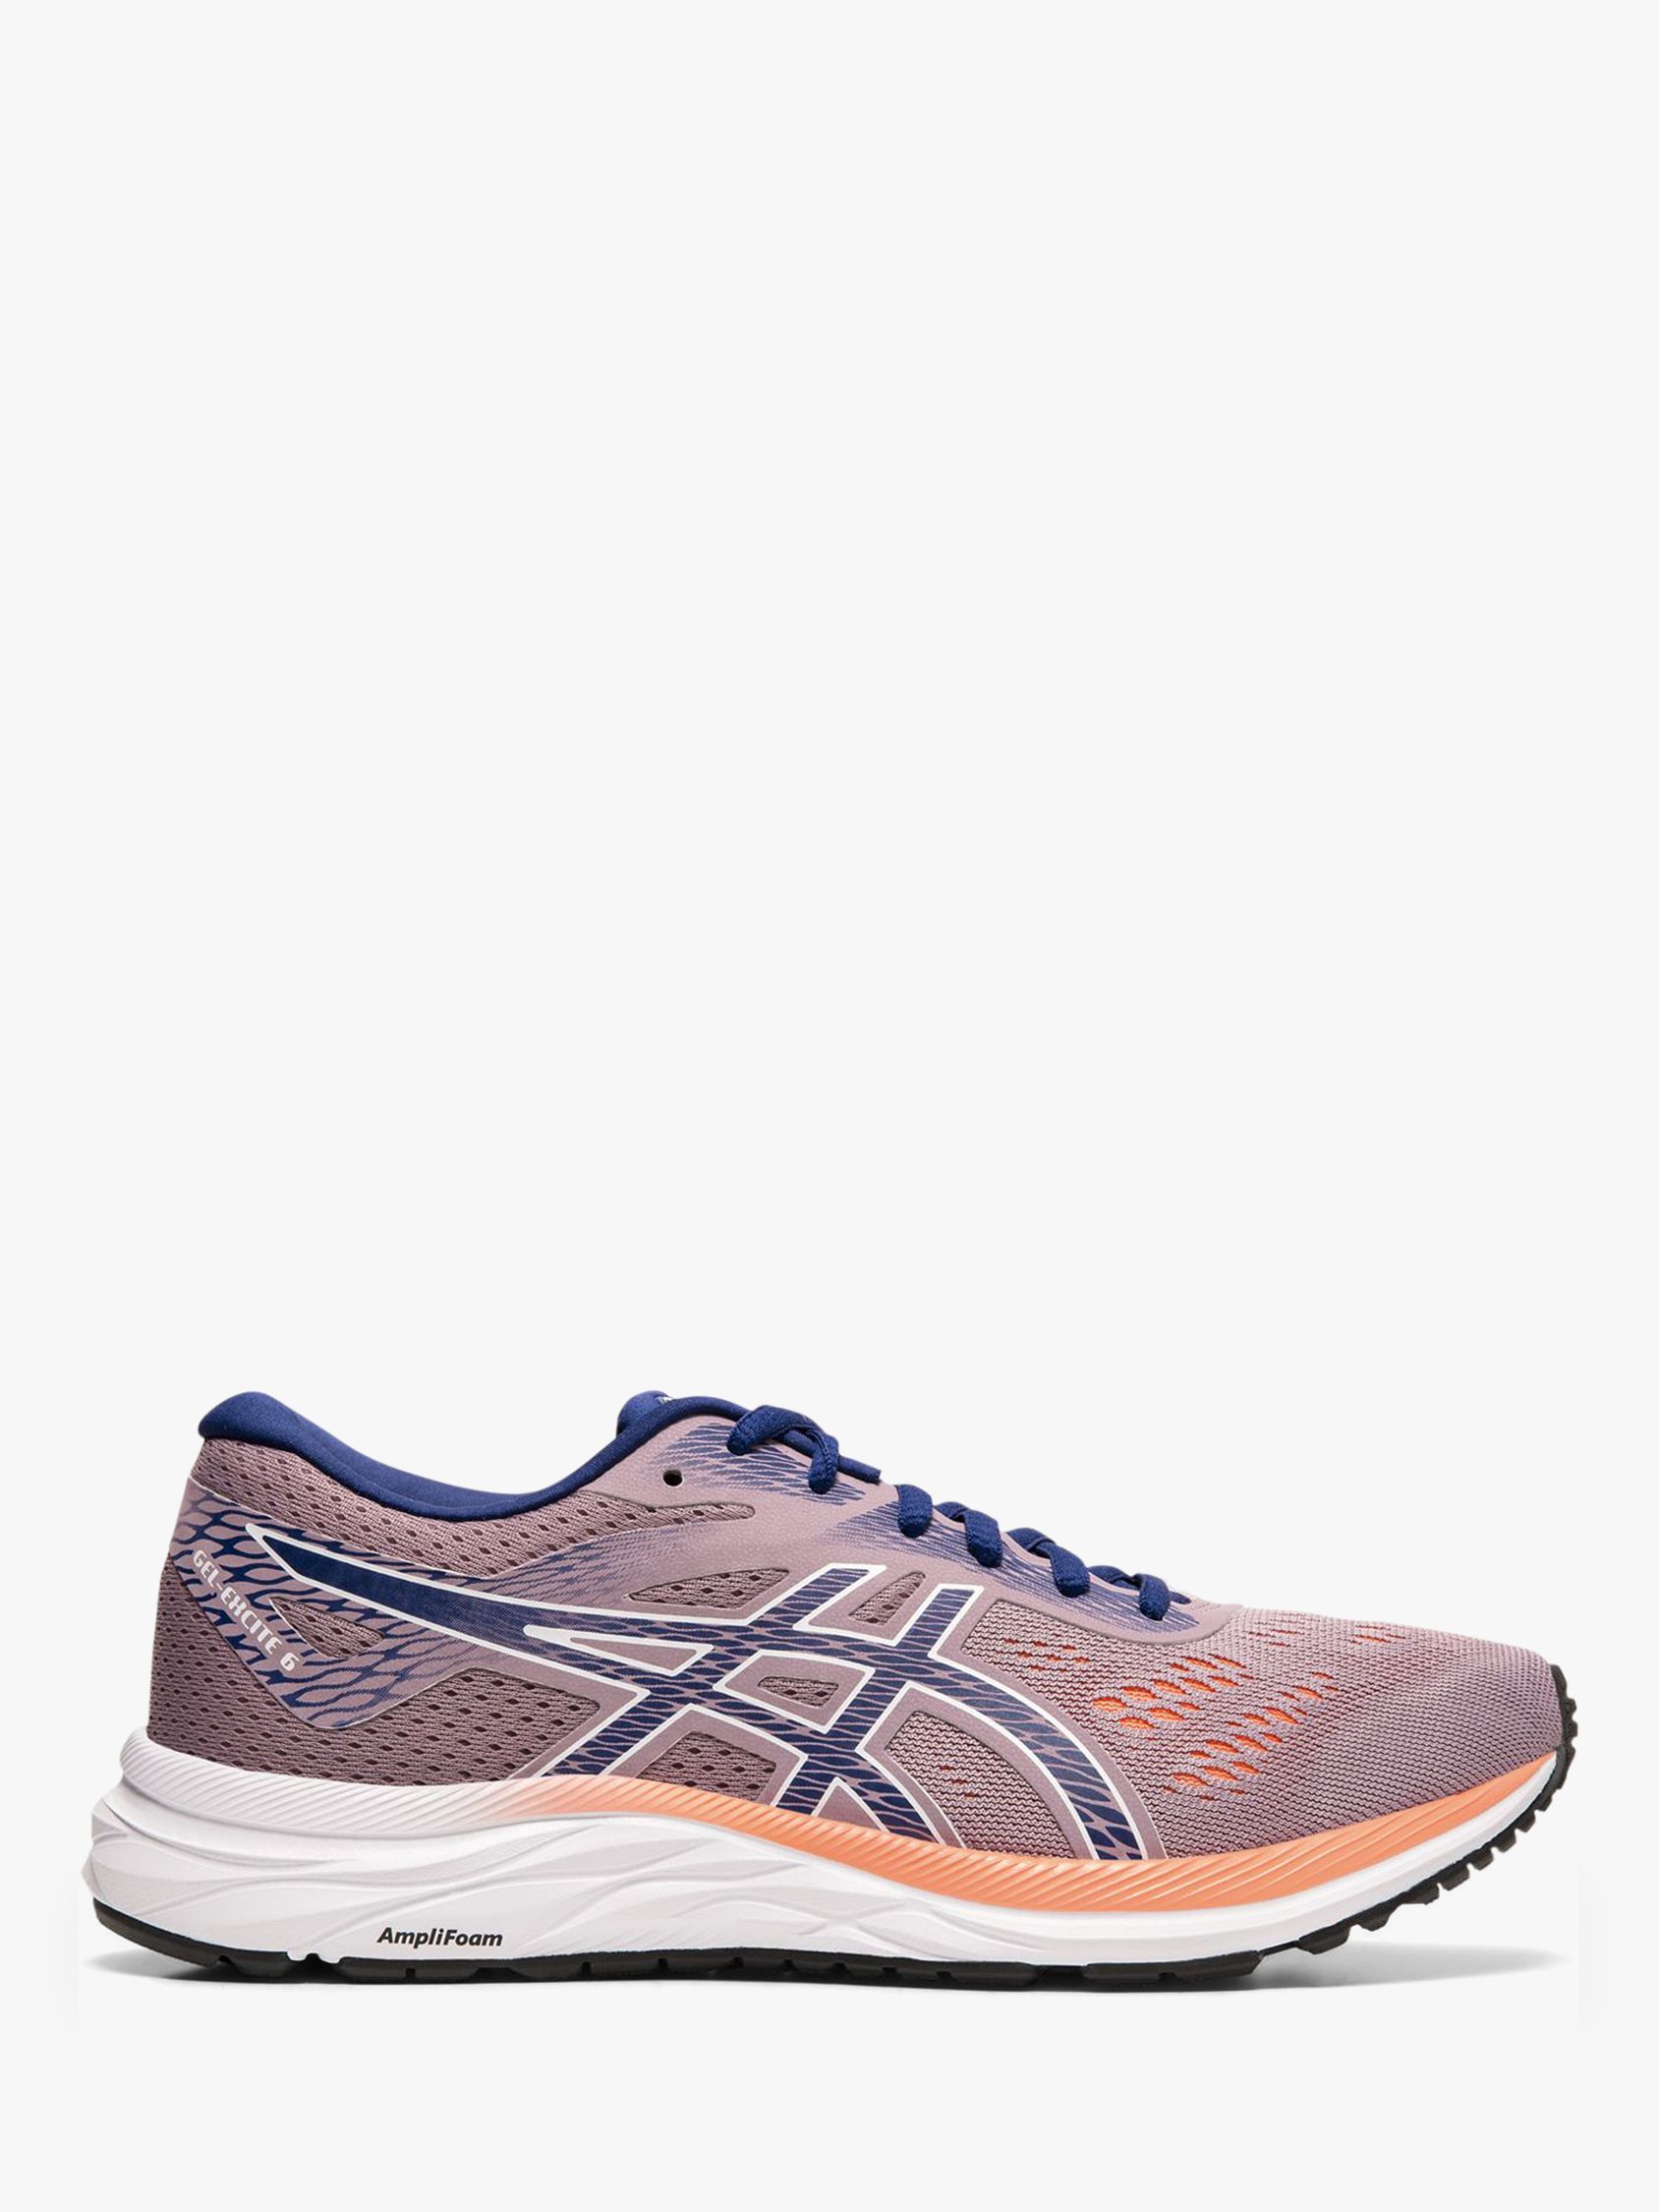 asics gel excite 6 womens review